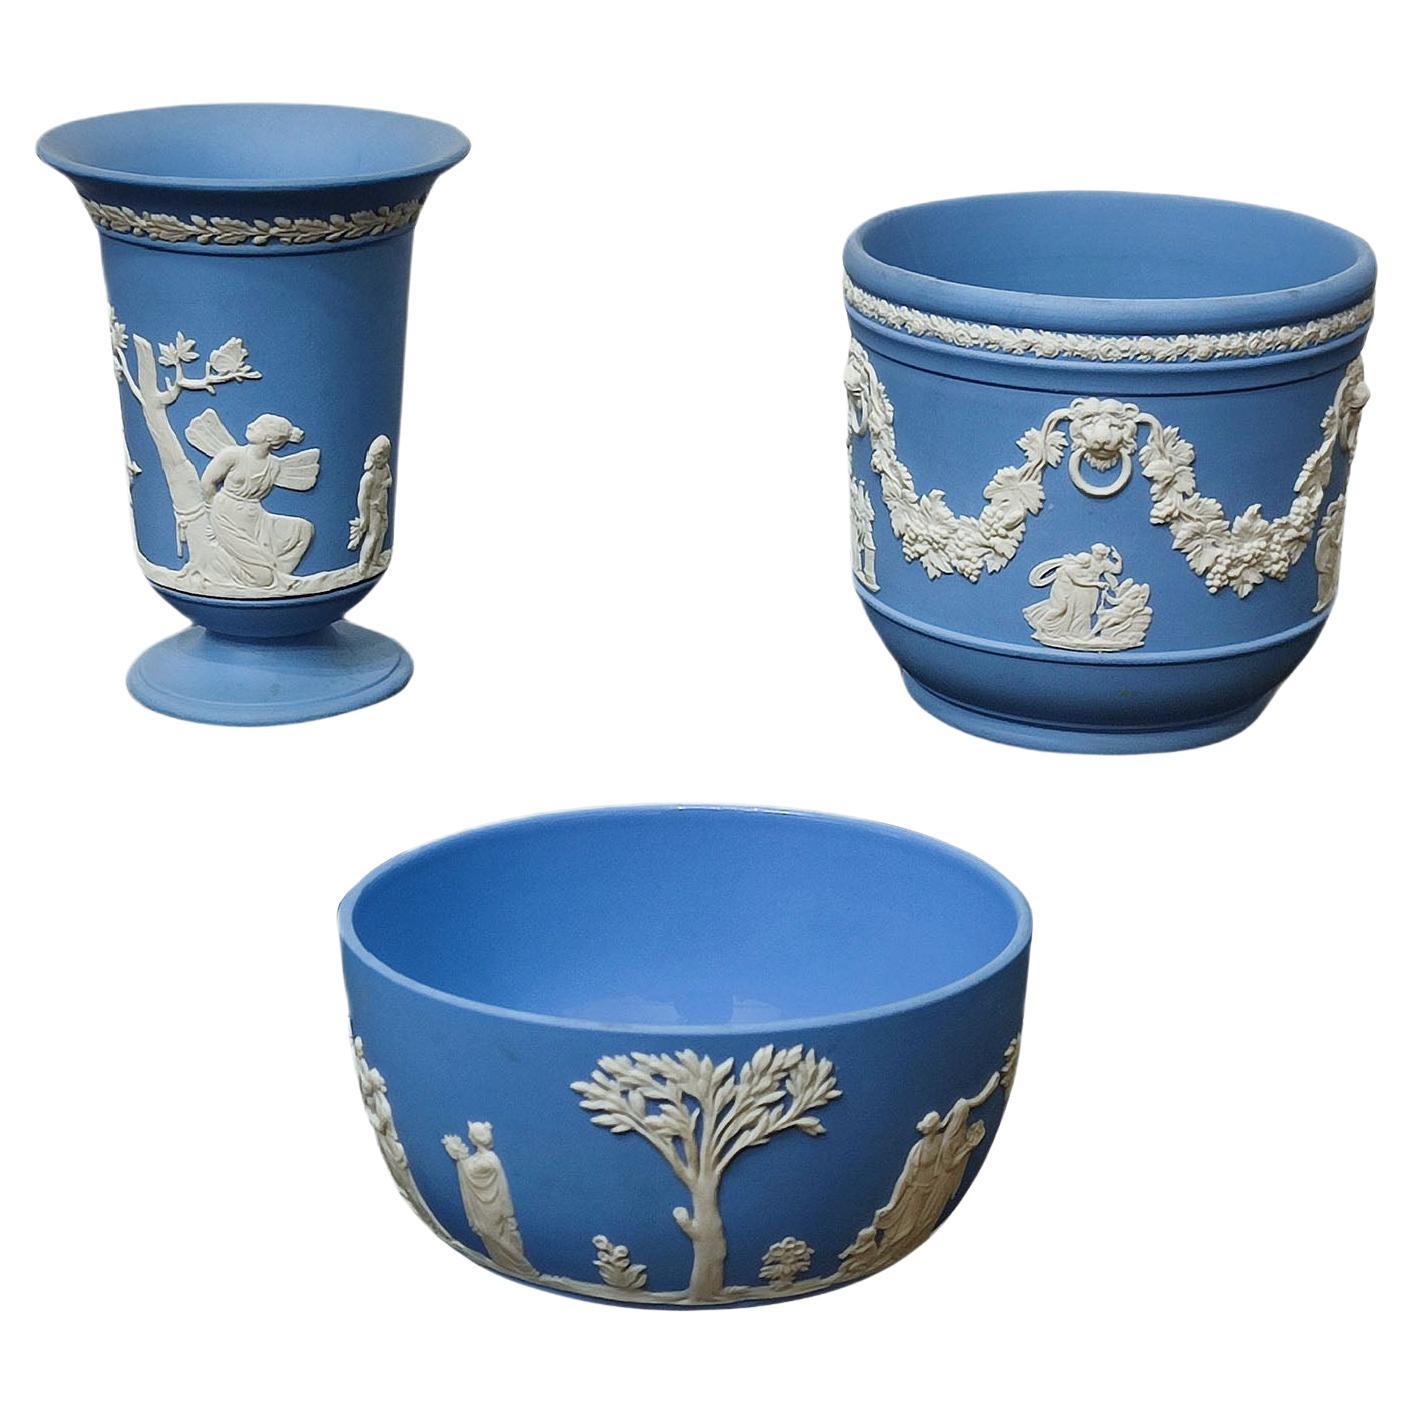 Wedgwood Blue Jasper Ware Vessels Classical Scenes, Collection of 3, FREESHIP For Sale